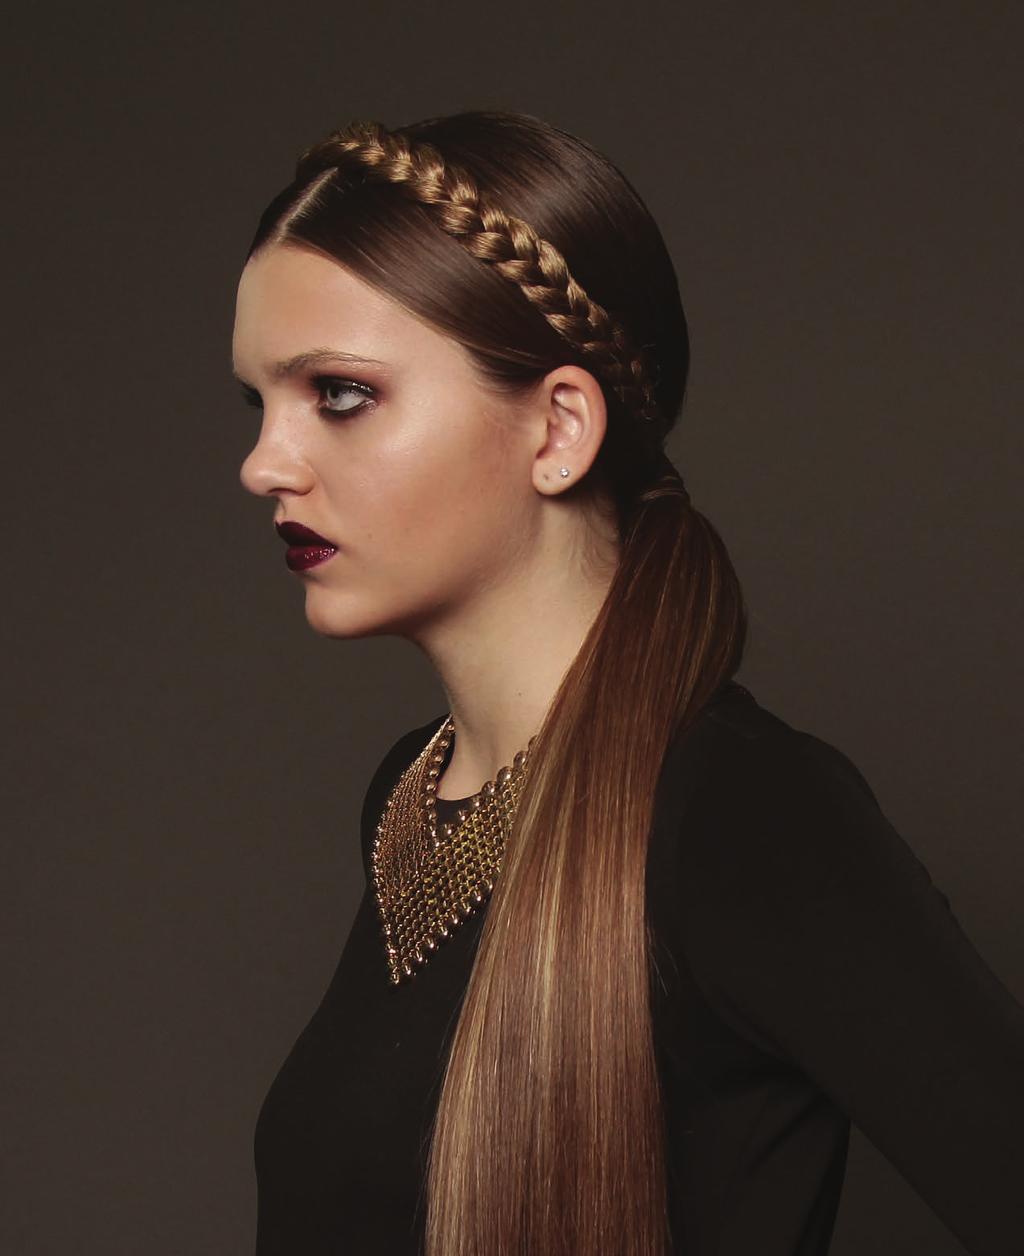 pony tails Made with 100% human hair, these superior-quality extensions blend naturally for an